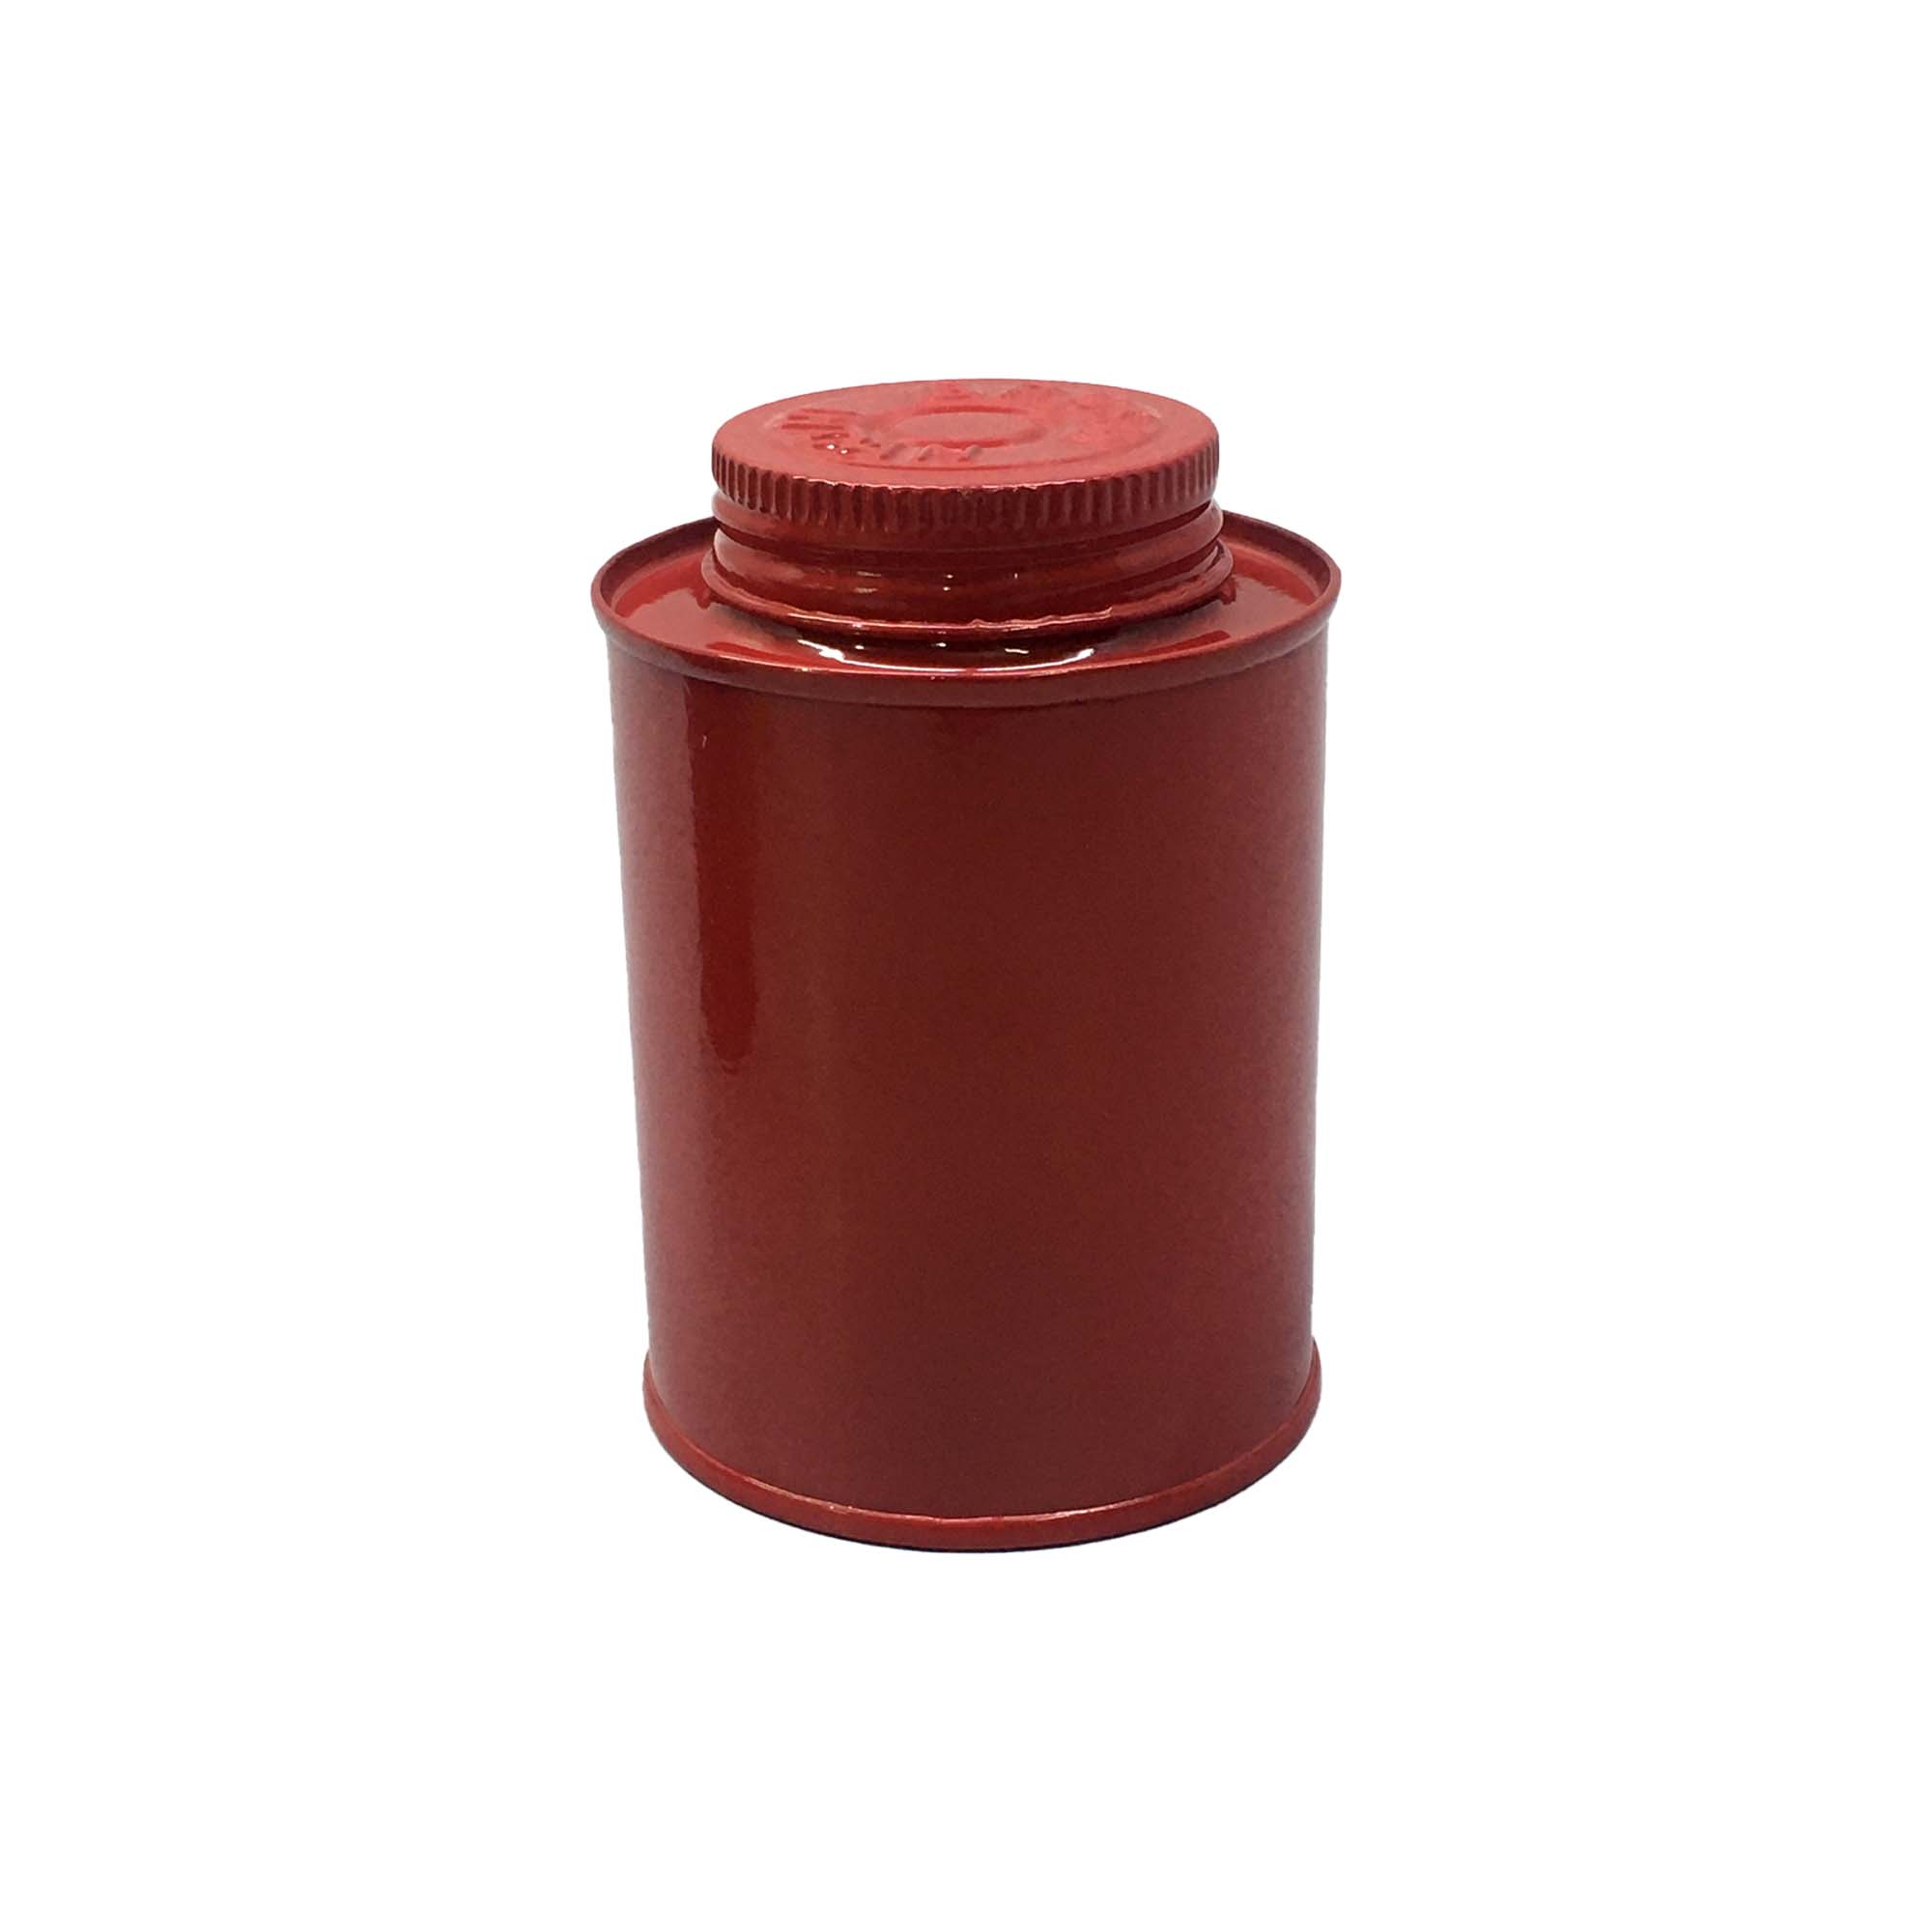 Vintage Spice Tin Canister Red 6x9.5cm